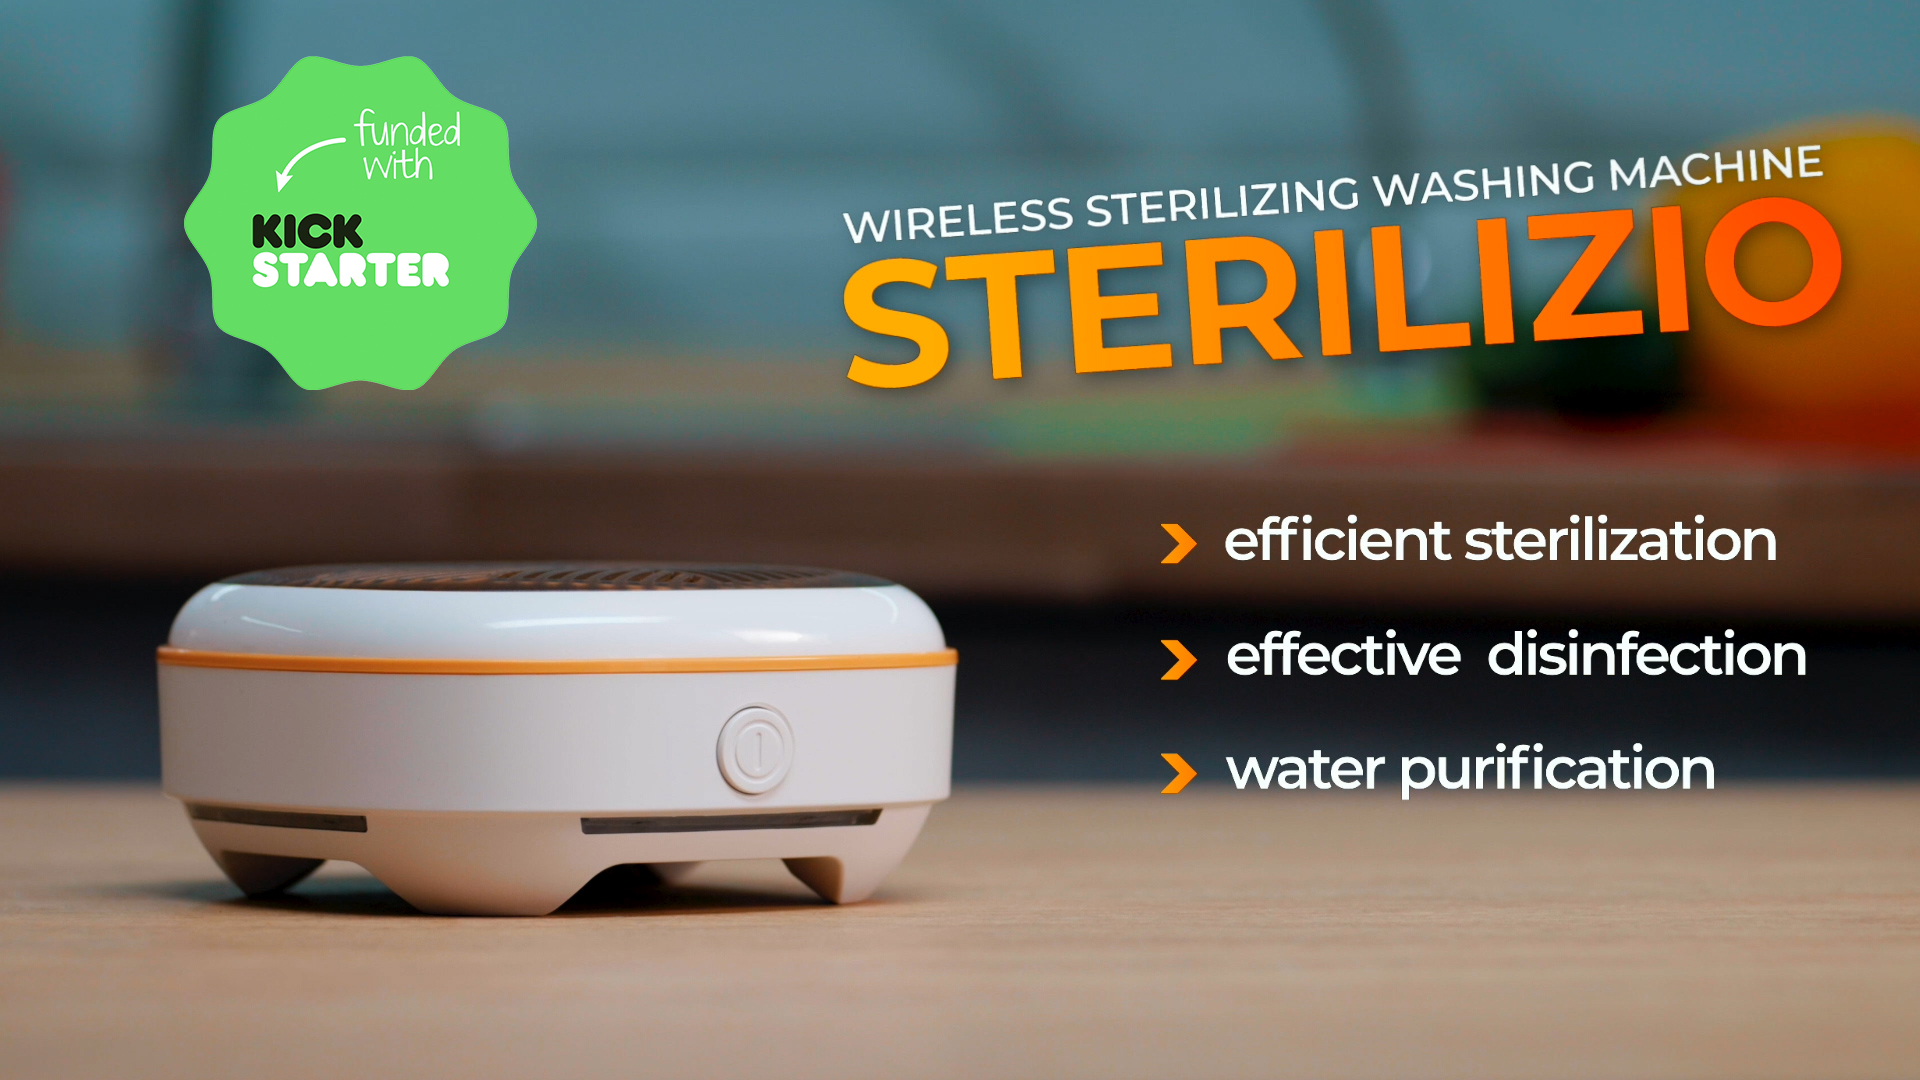 New STERLIZIO Wireless Washing Cube Brings Easy Cleaning and  Freedom from Germs at Home